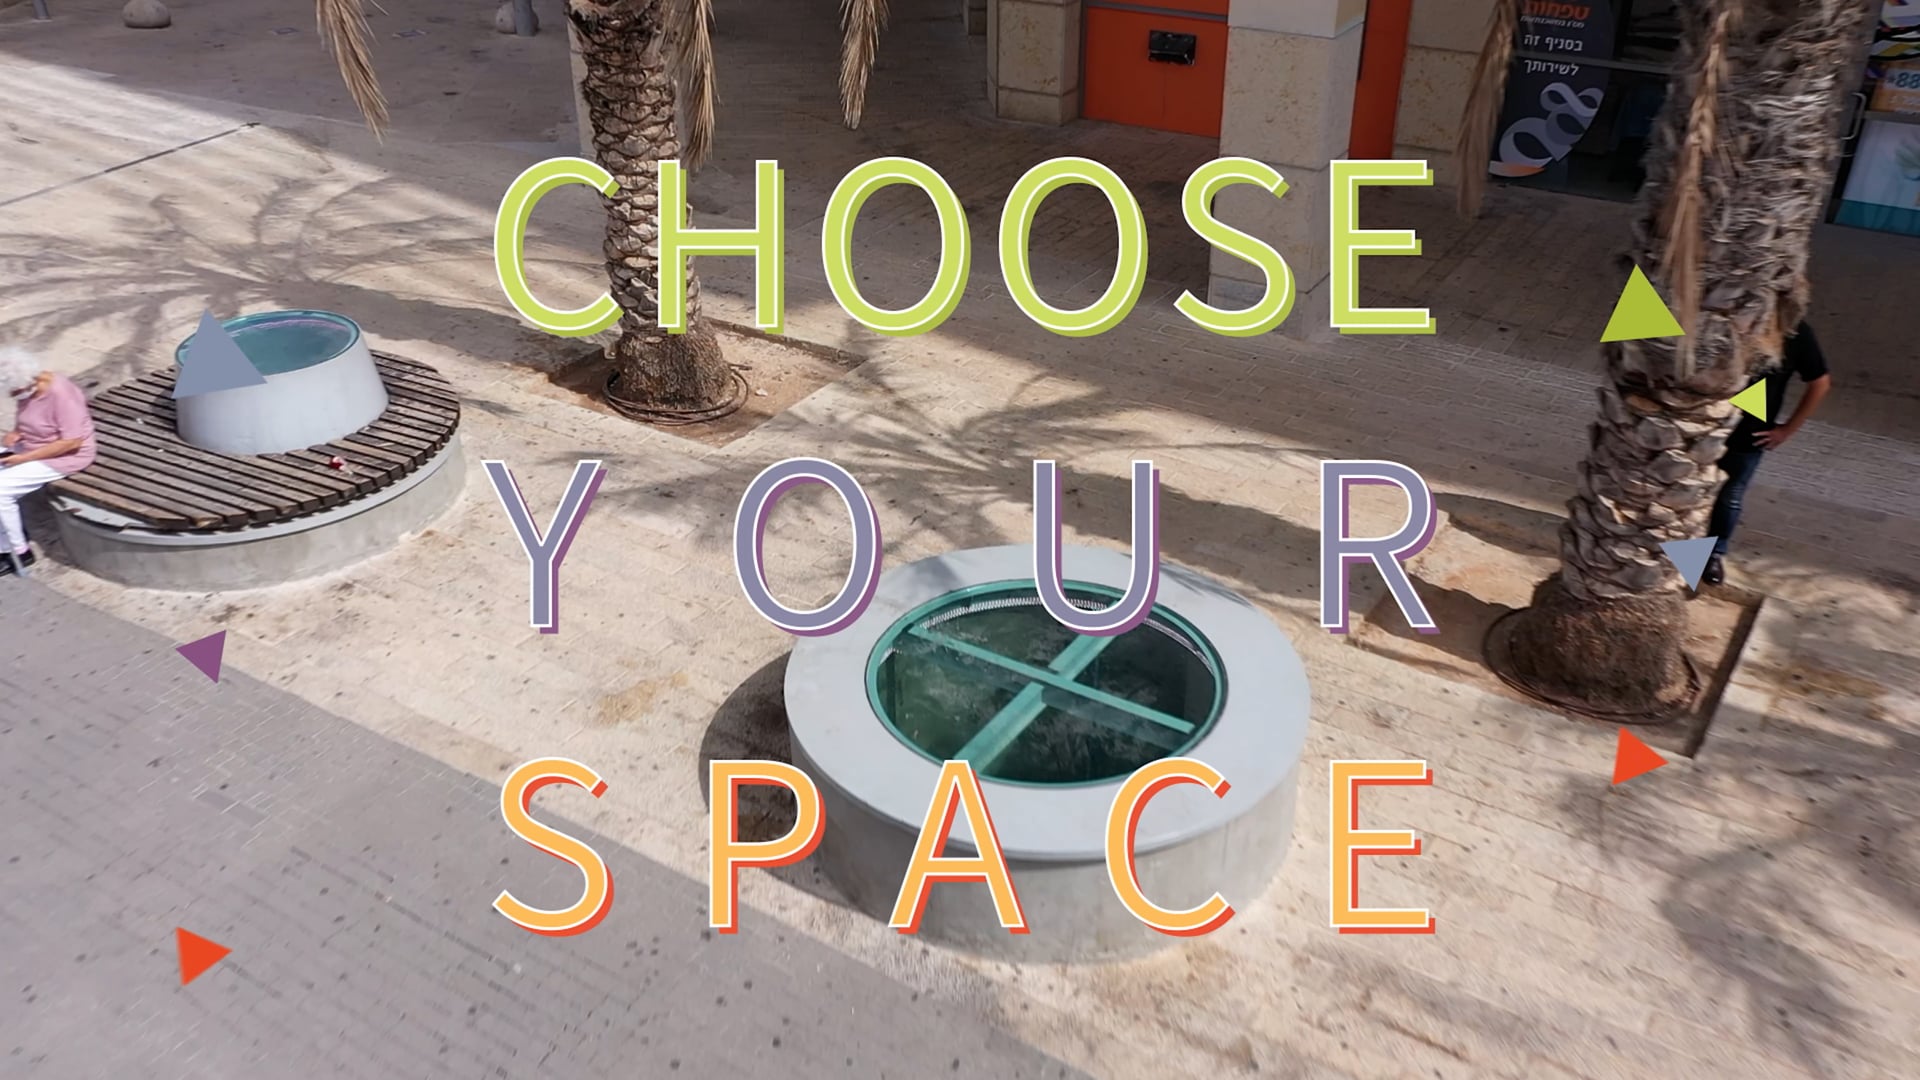 SpaceMod - Shared Space in Modiin